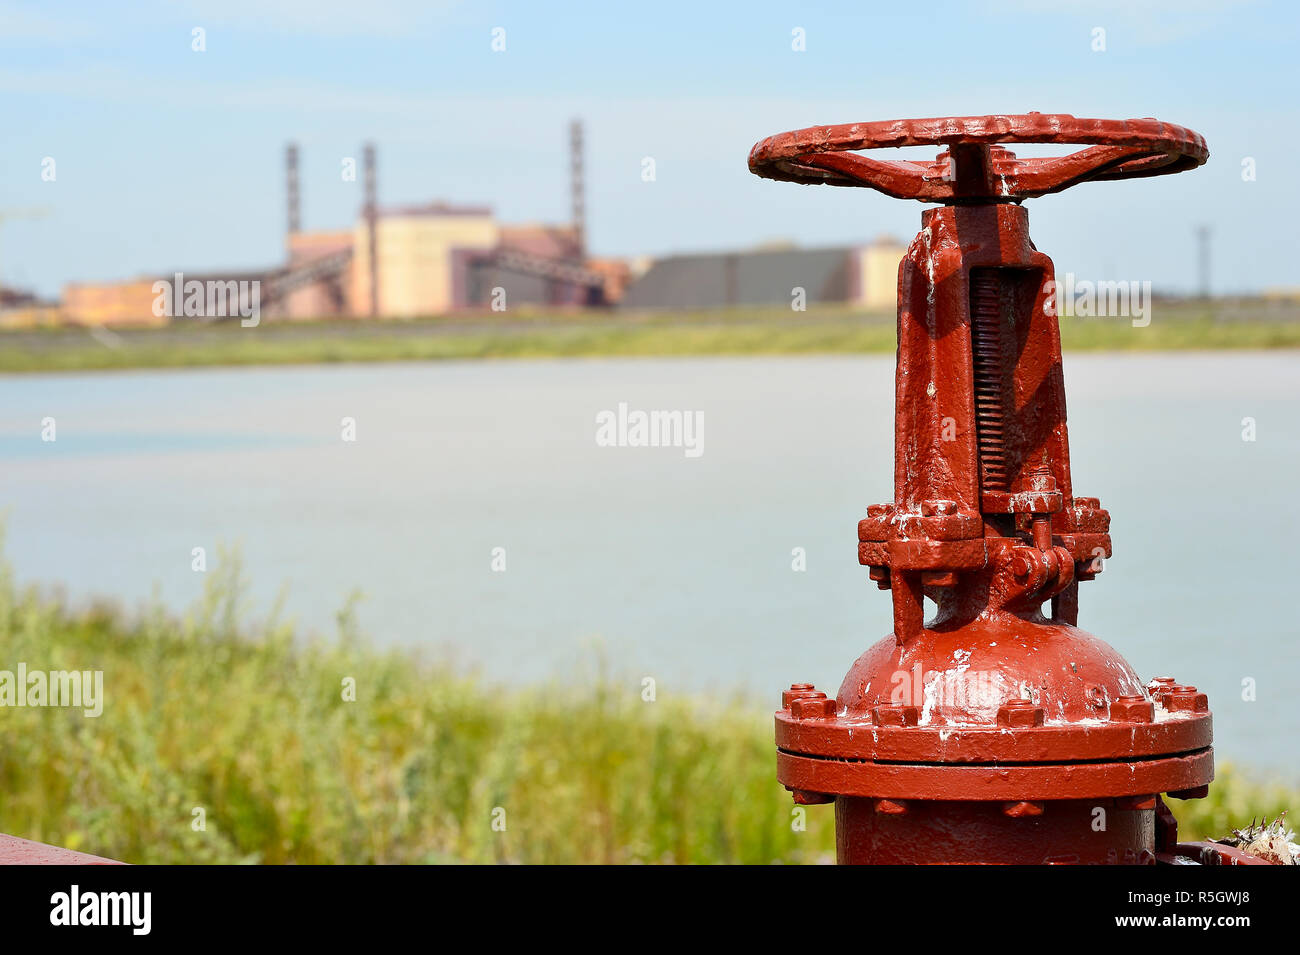 The valve from the pipeline against the background of the factory and an artificial lake Stock Photo